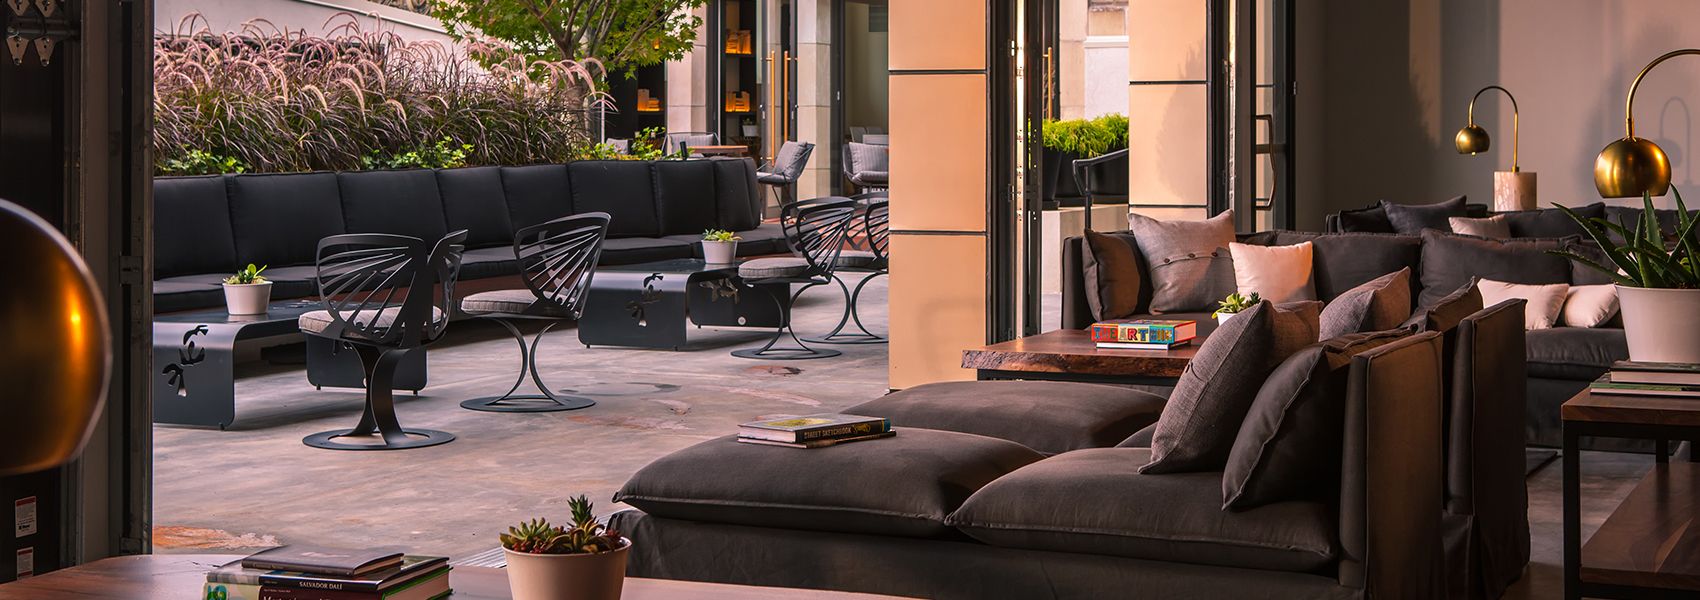 outdoor rooftop space with sophisticated decor, leafy greenery, and lounge seating